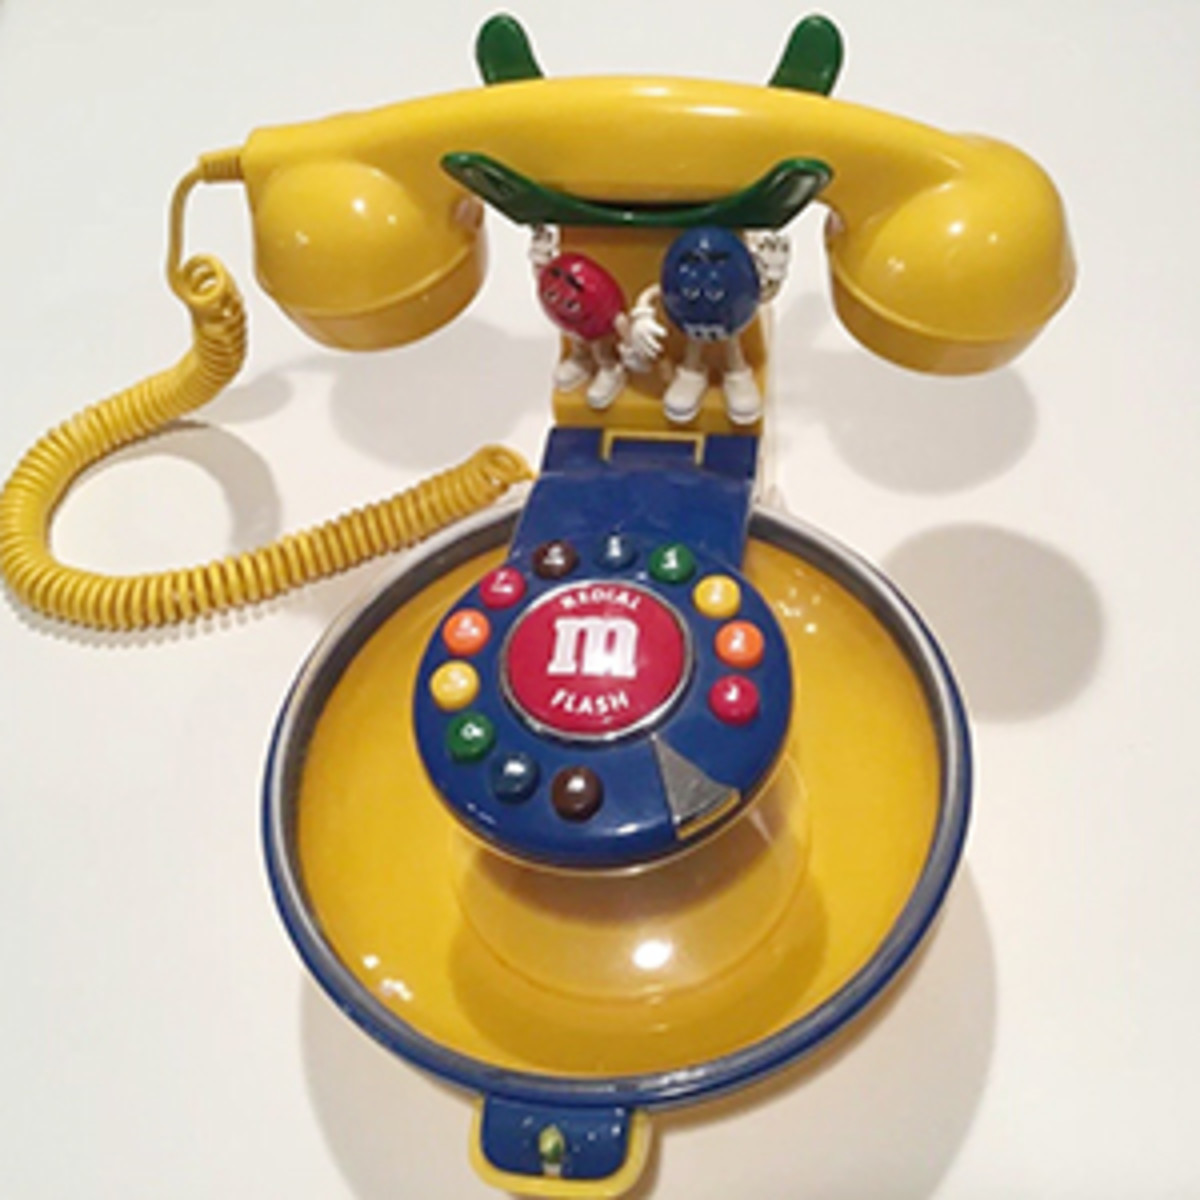 Phones were designed with everything in mind.  M & M's for example